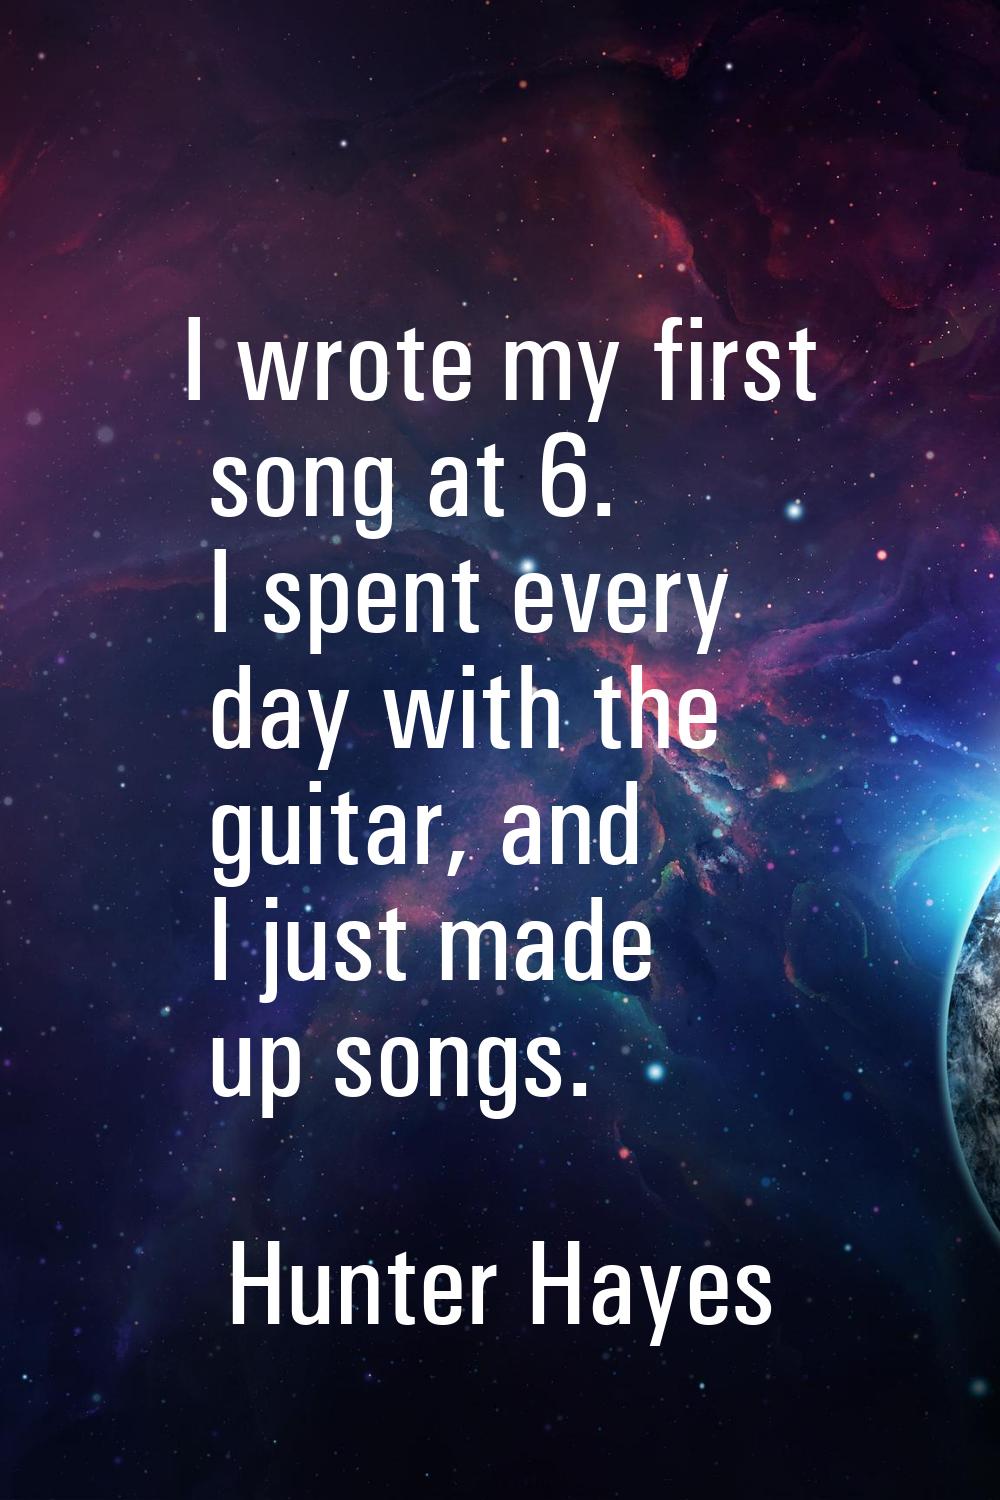 I wrote my first song at 6. I spent every day with the guitar, and I just made up songs.